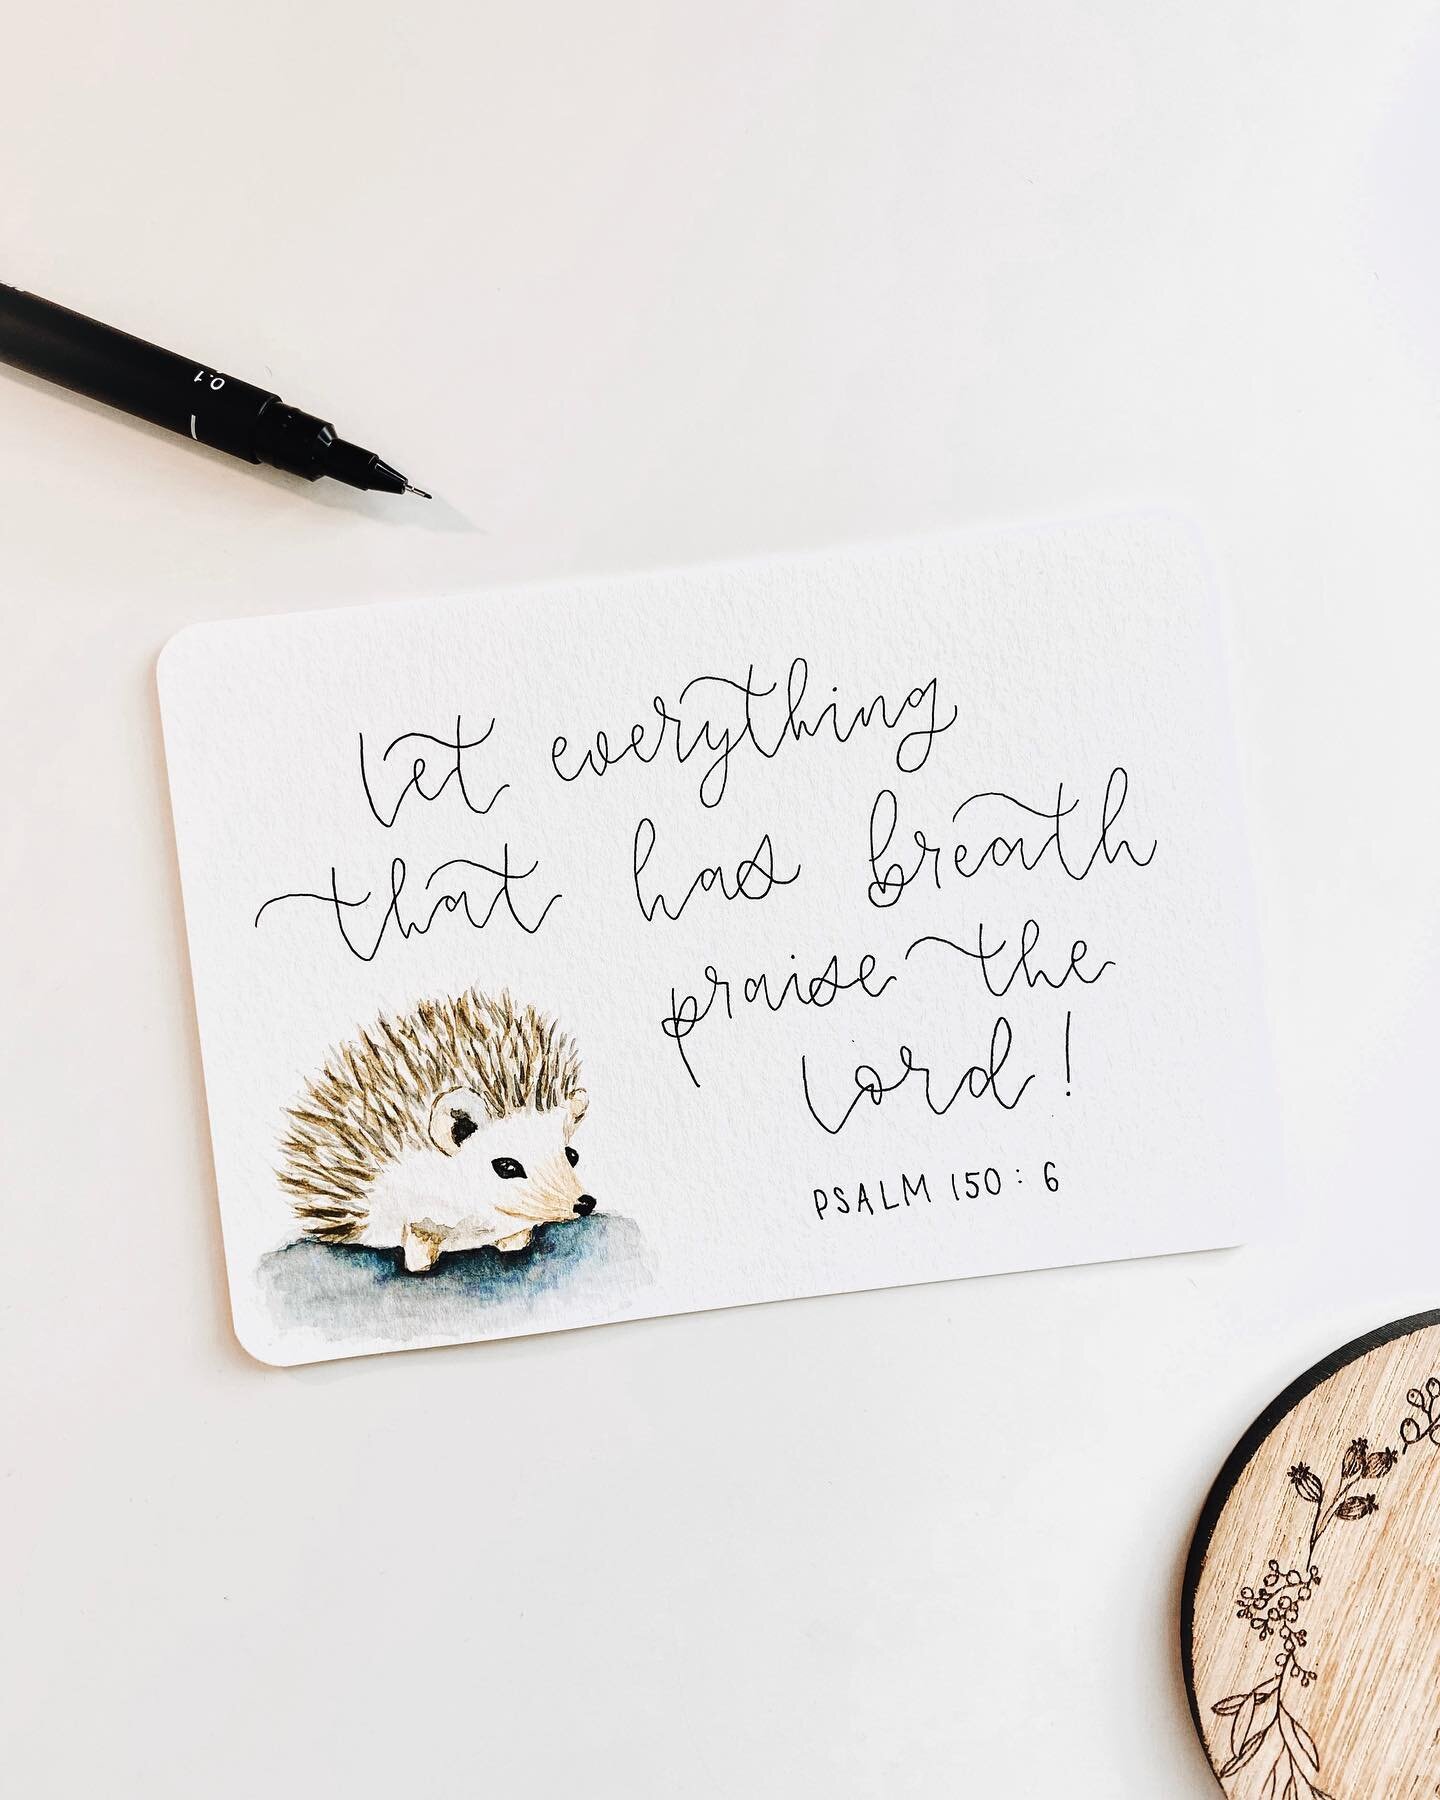 Because He is so worthy! 🤍 ⁣
⁣
I had such a fun time painting this little guy 🦔 for a friend who loves hedgehogs 🙈⁣
⁣
All of creation sings the praises of our God&hellip;isn&rsquo;t that beautiful? It&rsquo;s what we&rsquo;ve been created for - th